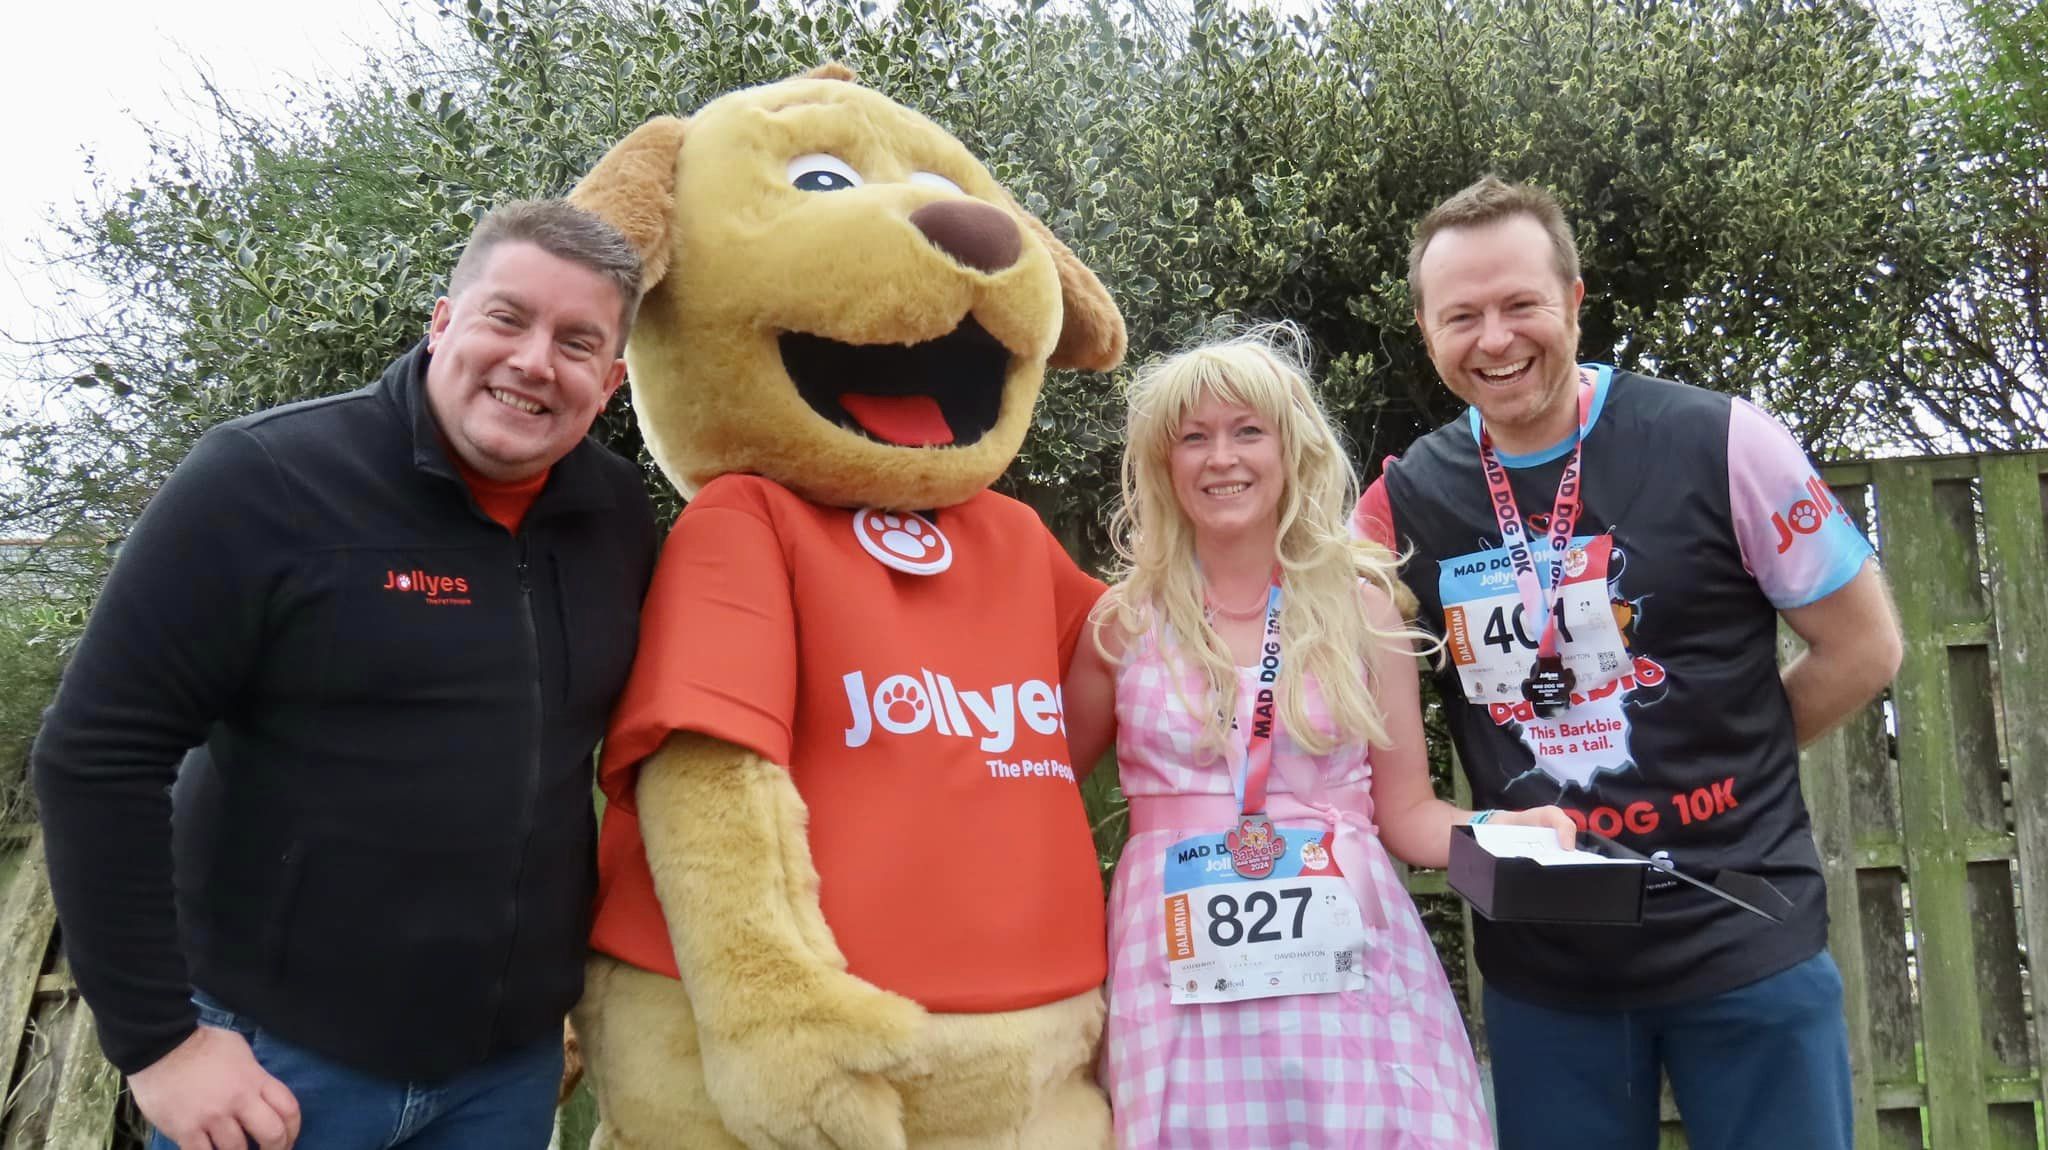 Hundreds of runners enjoyed the Southport Mad Dog 10lk run sponsored by Jollyes - The Pet People. Jollyes head of marketing Phil Turner-Naylor (left); Jollyes CEO Joe Wykes (right); and fancy dress winner Charlie Westbrook-Platts